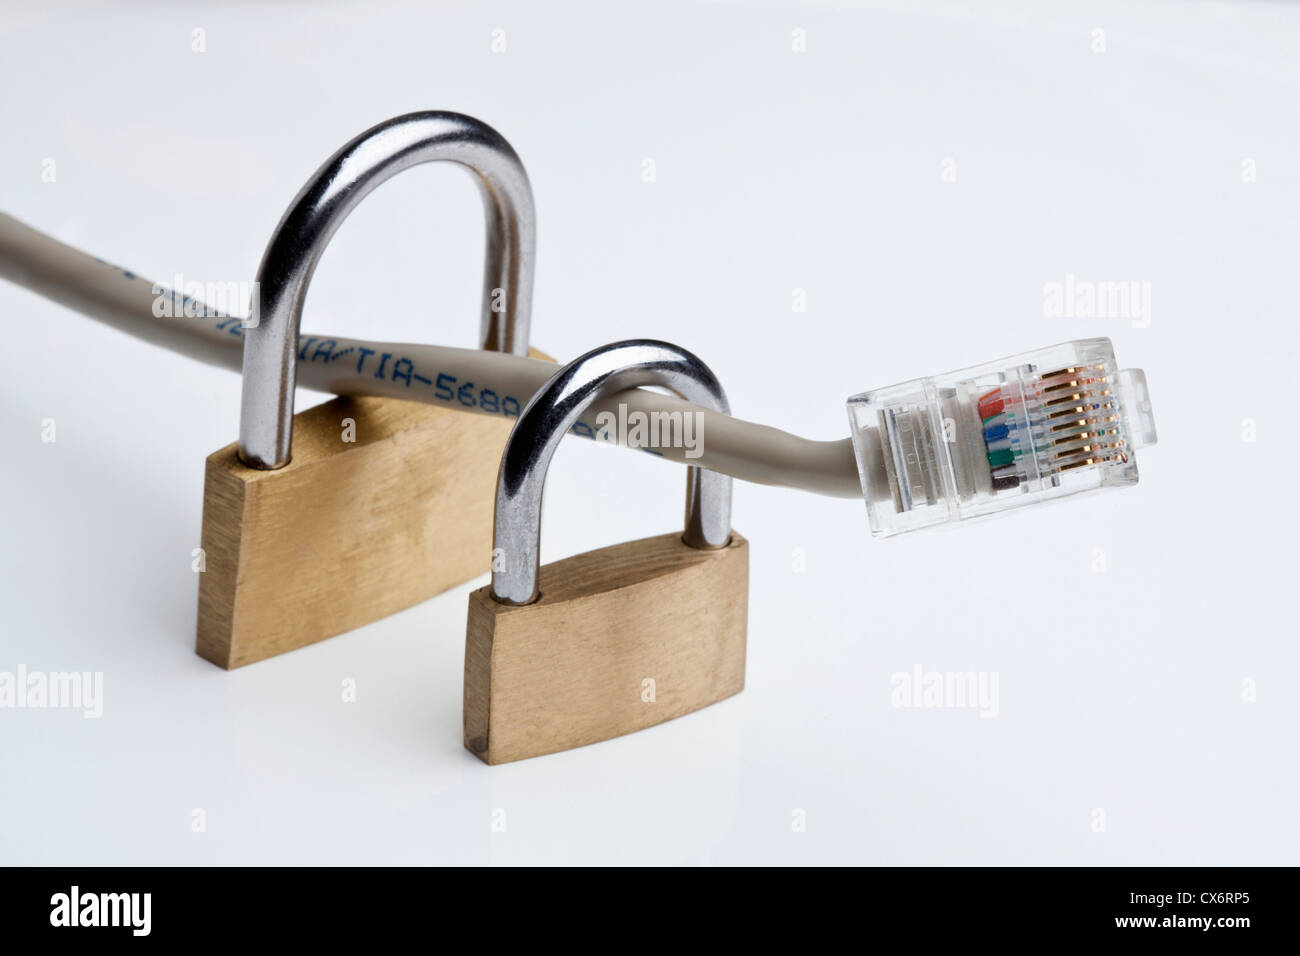 Two padlocks around an Ethernet cable Stock Photo